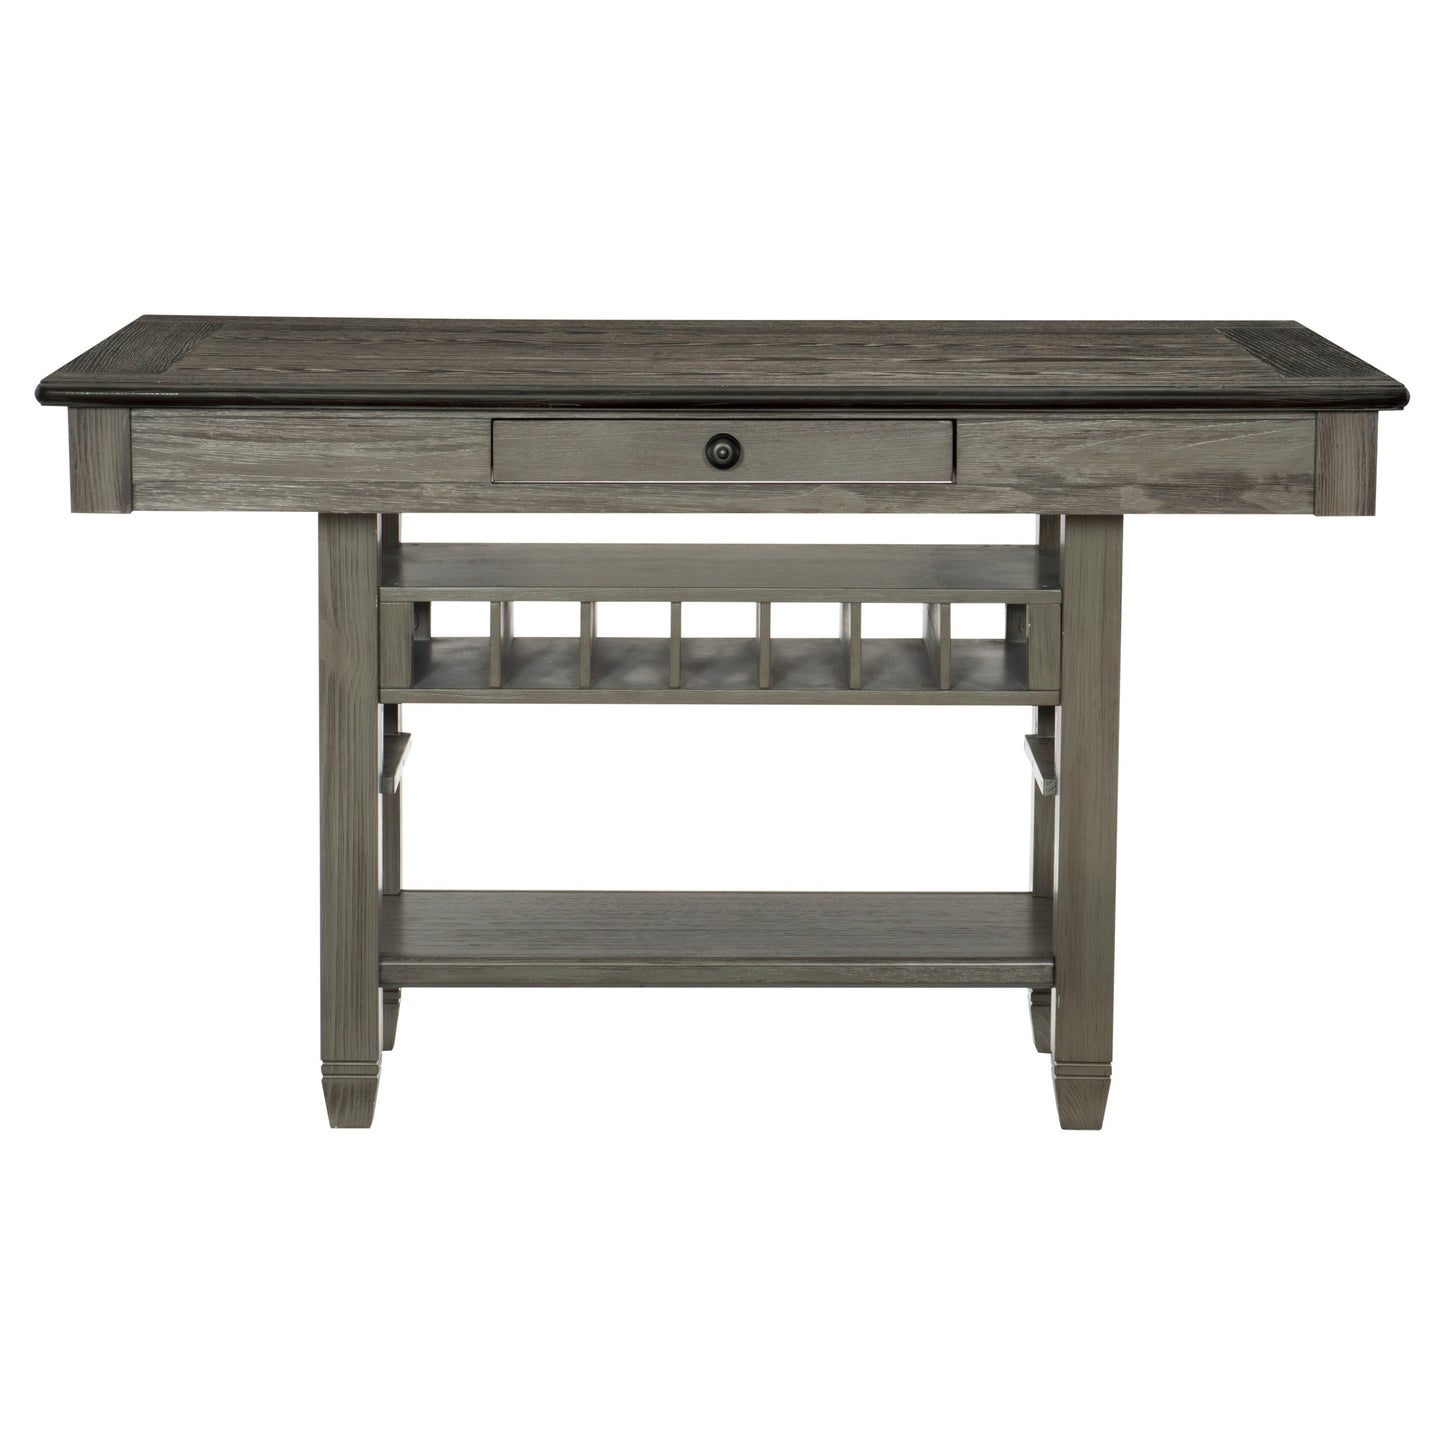 1pc Counter Height Table with 4 Drawers Wine Rack Display Shelf Transitional Dining Furniture Antique Gray and Coffee Finish Storage Table